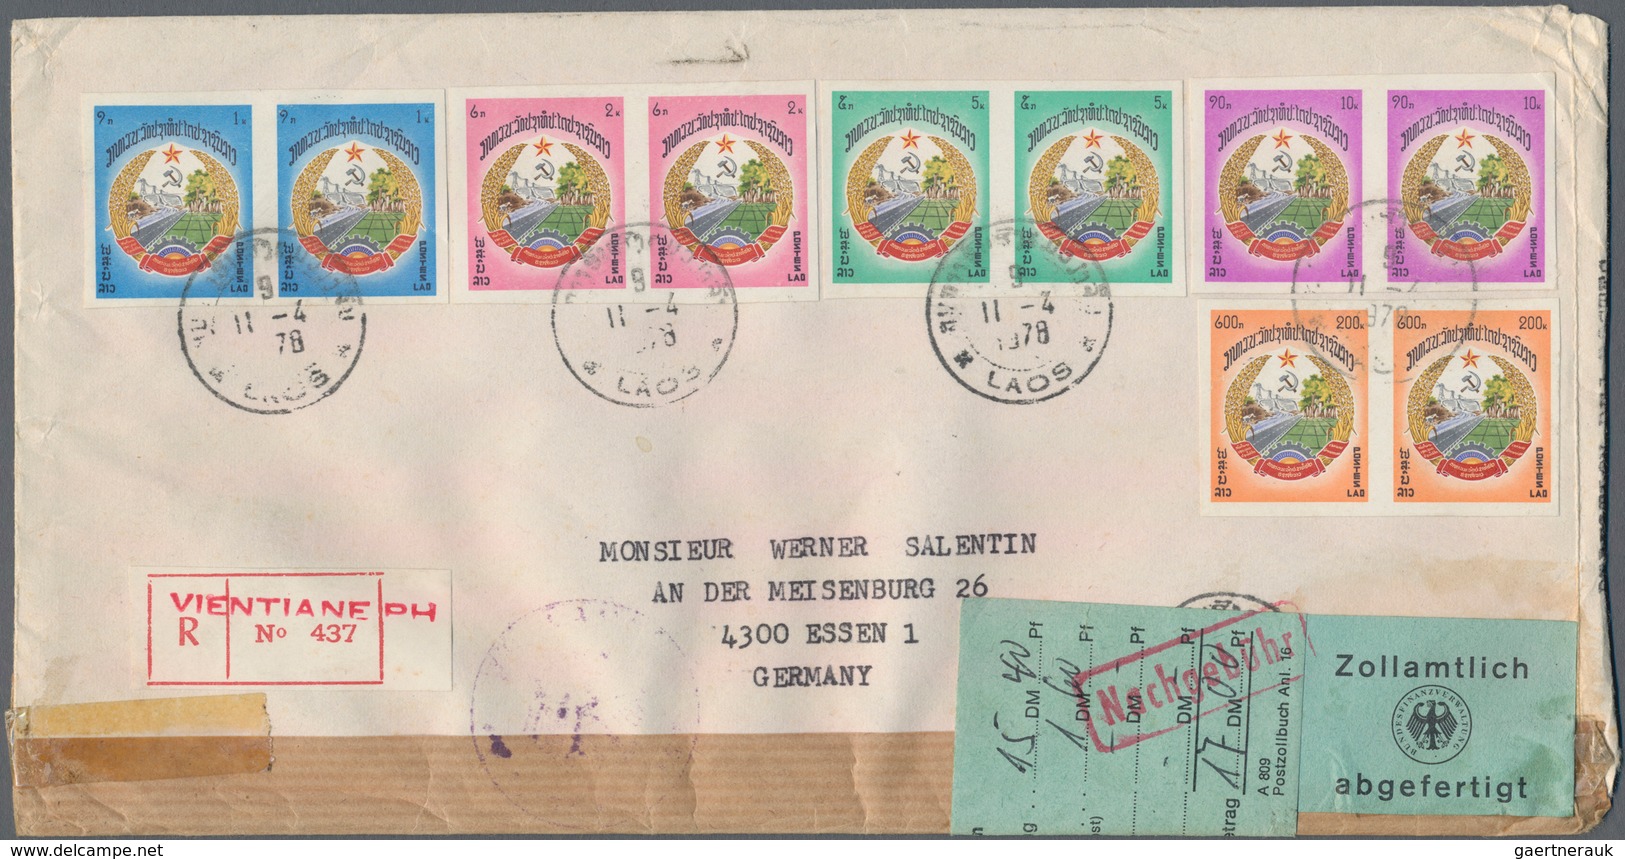 Laos: 1976, 1st Anniversary of People's Republic, group of nine covers: imperf. set on cacheted f.d.